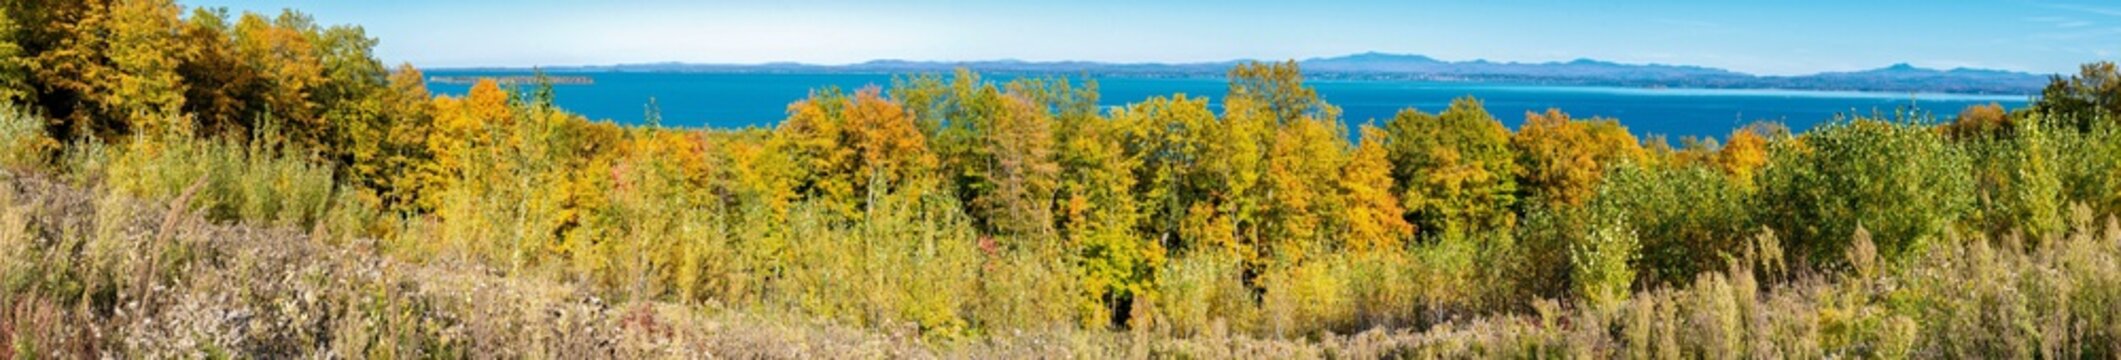 Panoramic view of Lake Champlain with Vermont state in background in late fall © Guy